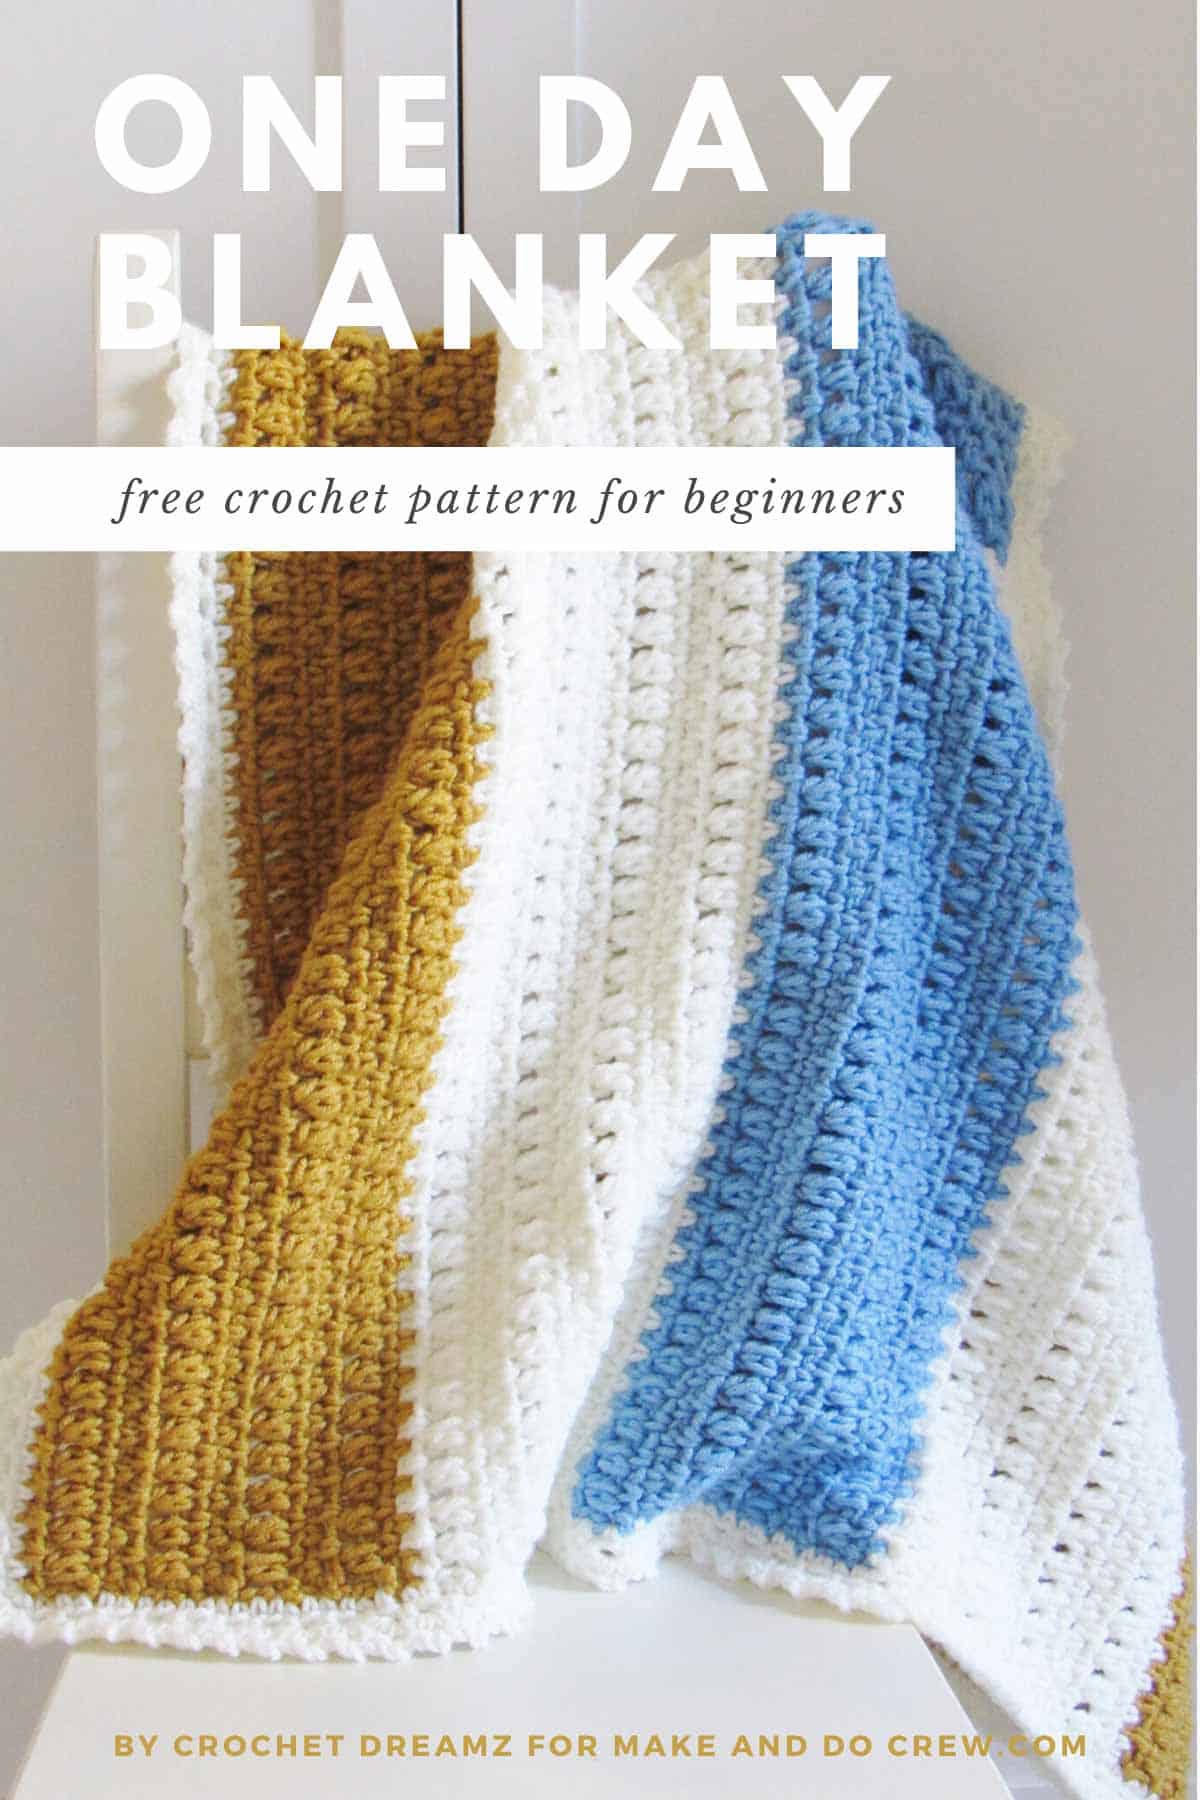 A wide gold, light blue, and white colored one-day crochet blanket pattern for beginners draped in a white chair.